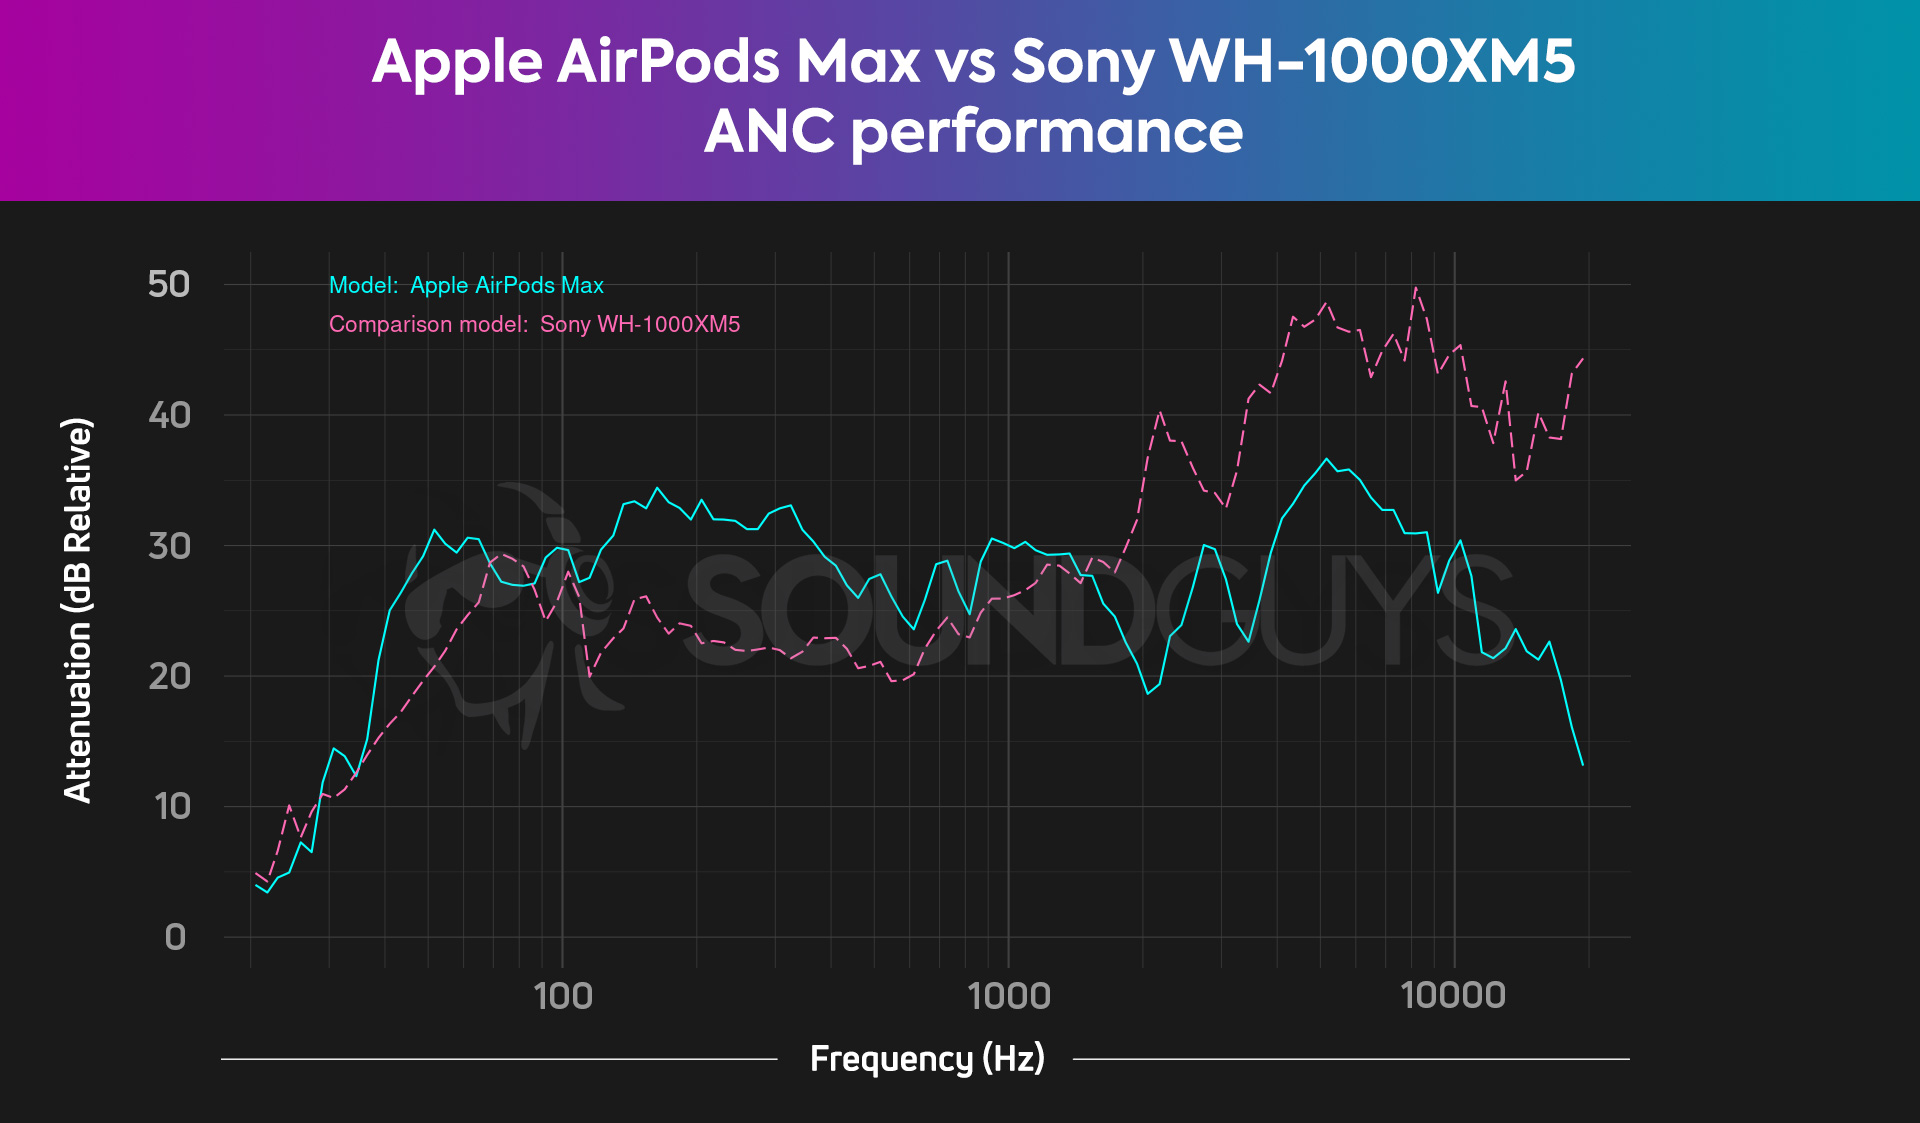 A chart compares the AirPods Max and Sony WH-1000XM5 ANC attenuation performance, revealing the AirPods Max the better low-frequency attenuator while the XM5 headphones do more to block out sounds above 1kHz.